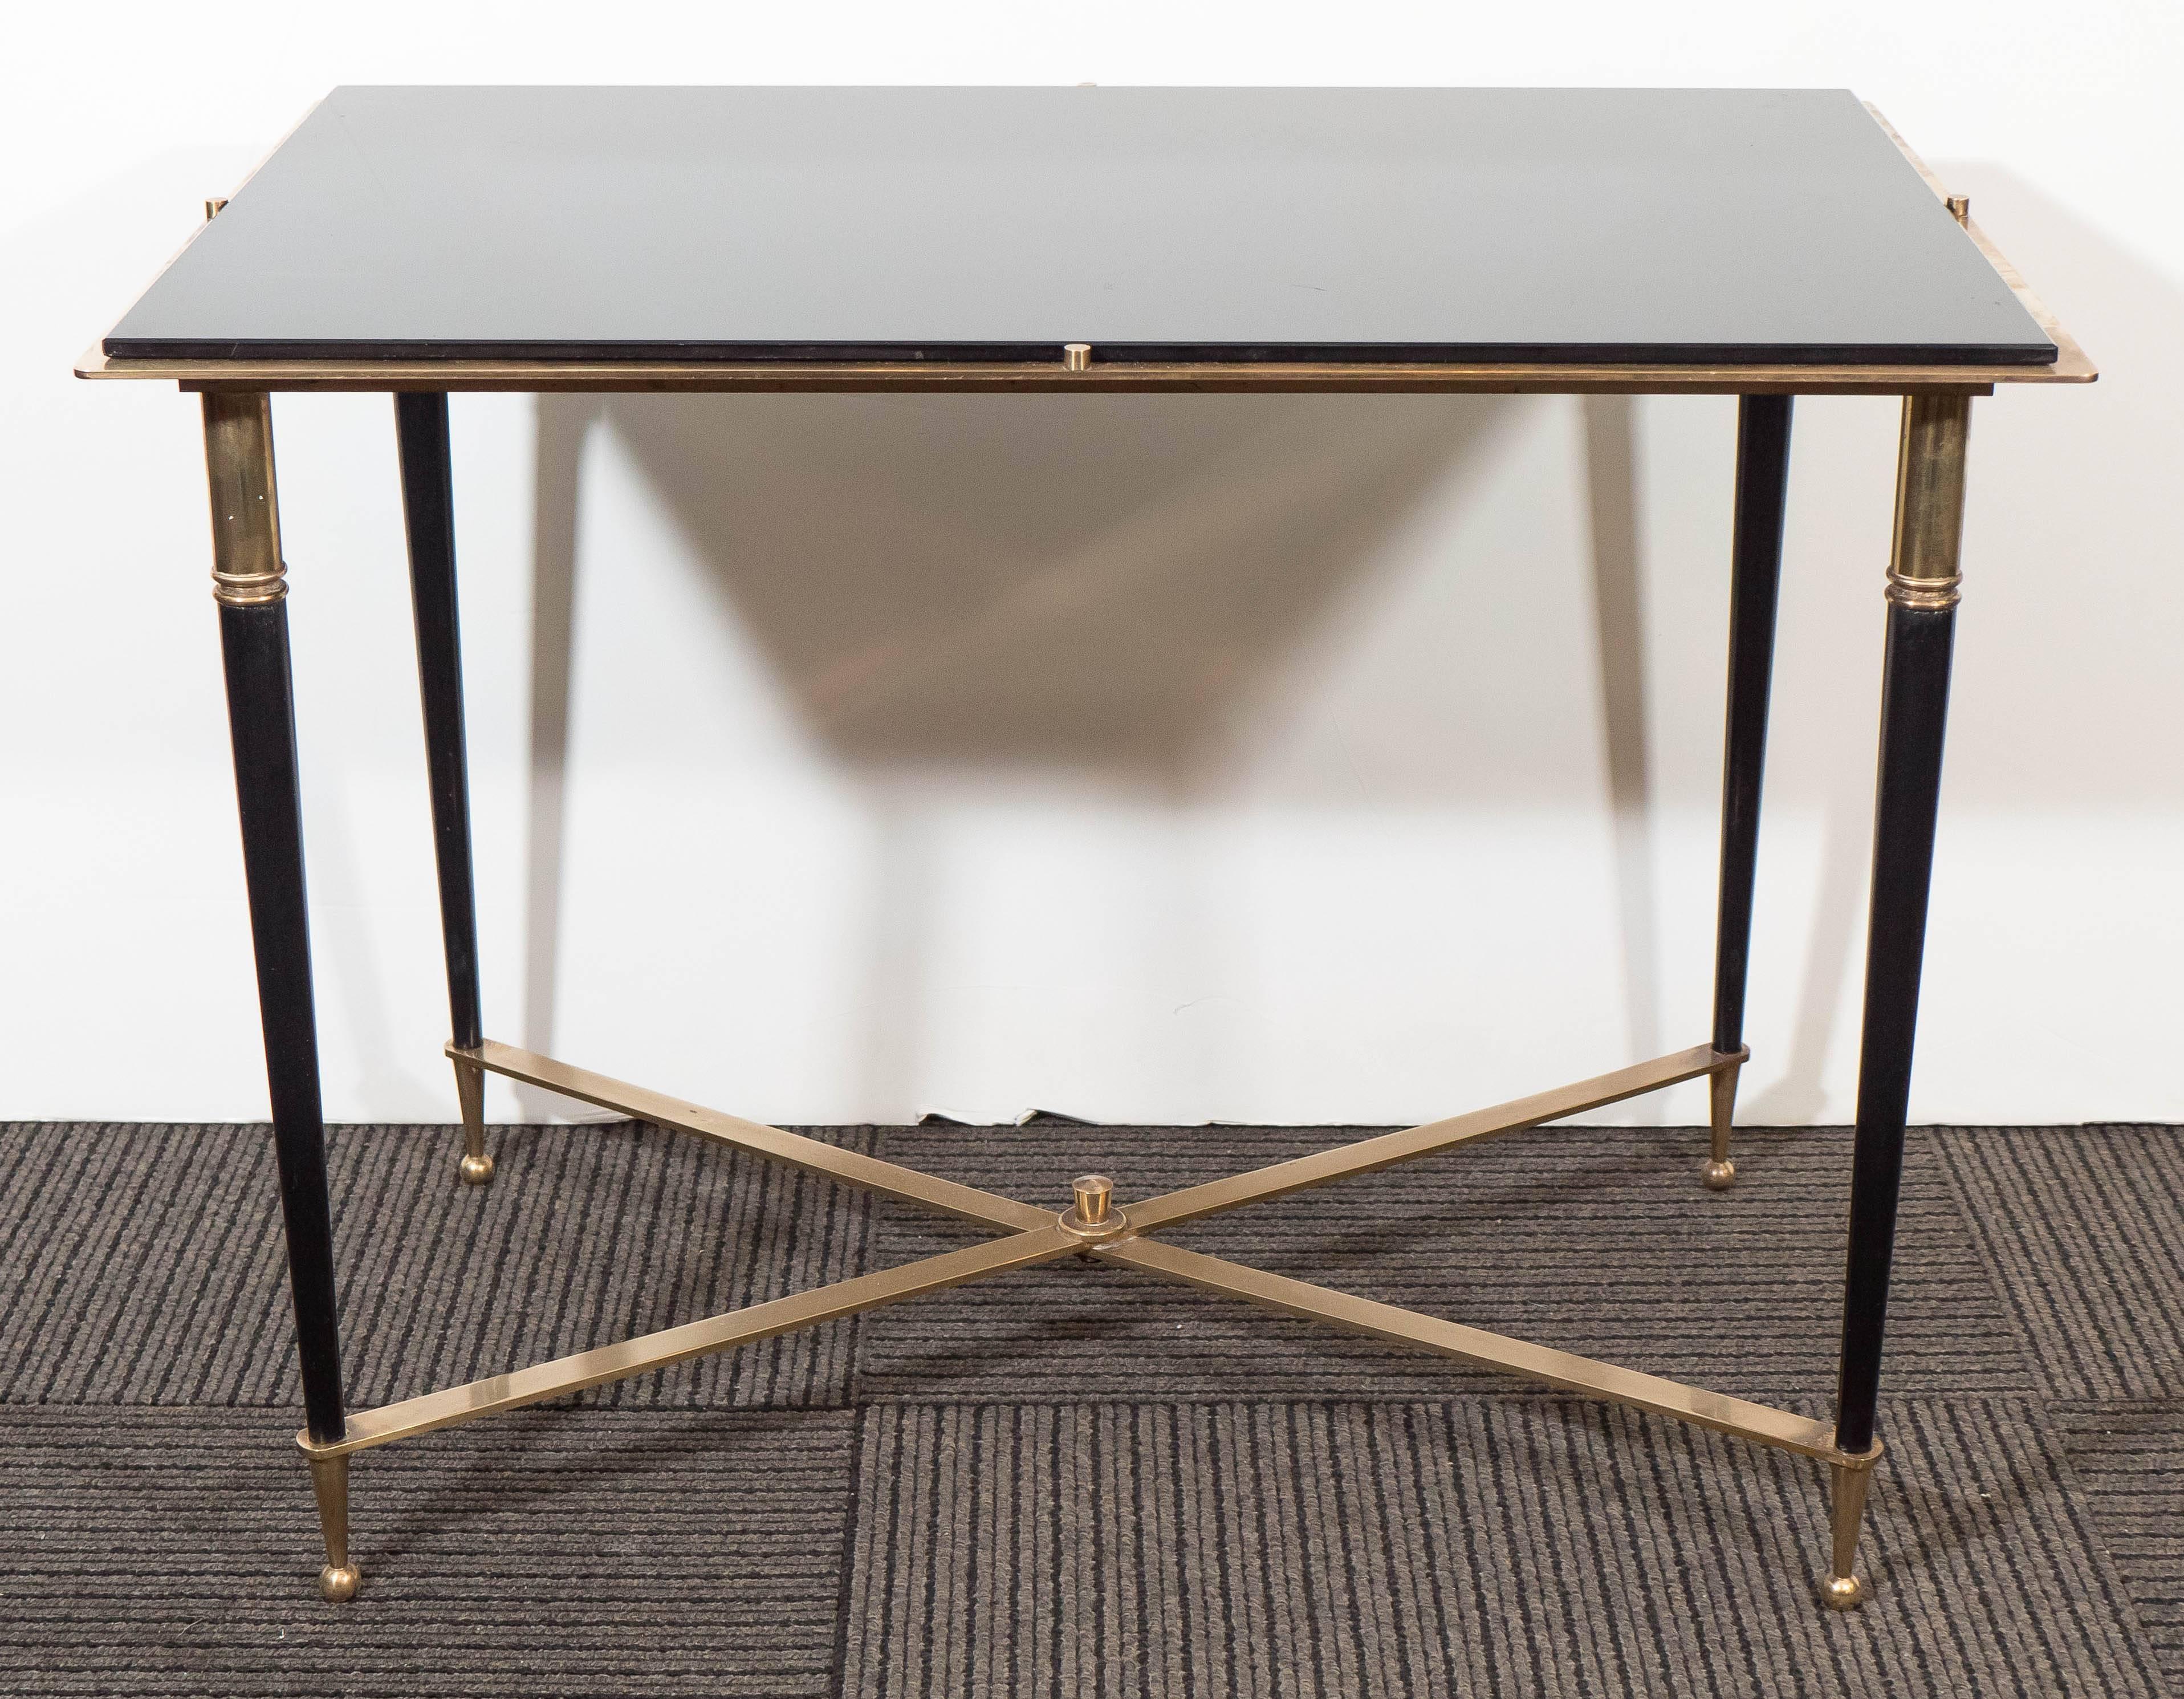 A side table designed in the style of Maison Jansen, produced in France, circa 1960s, with black glass top on bronze frame, over tapered legs with ball feet and X-form stretcher. The table is in very good vintage condition, consistent with age and